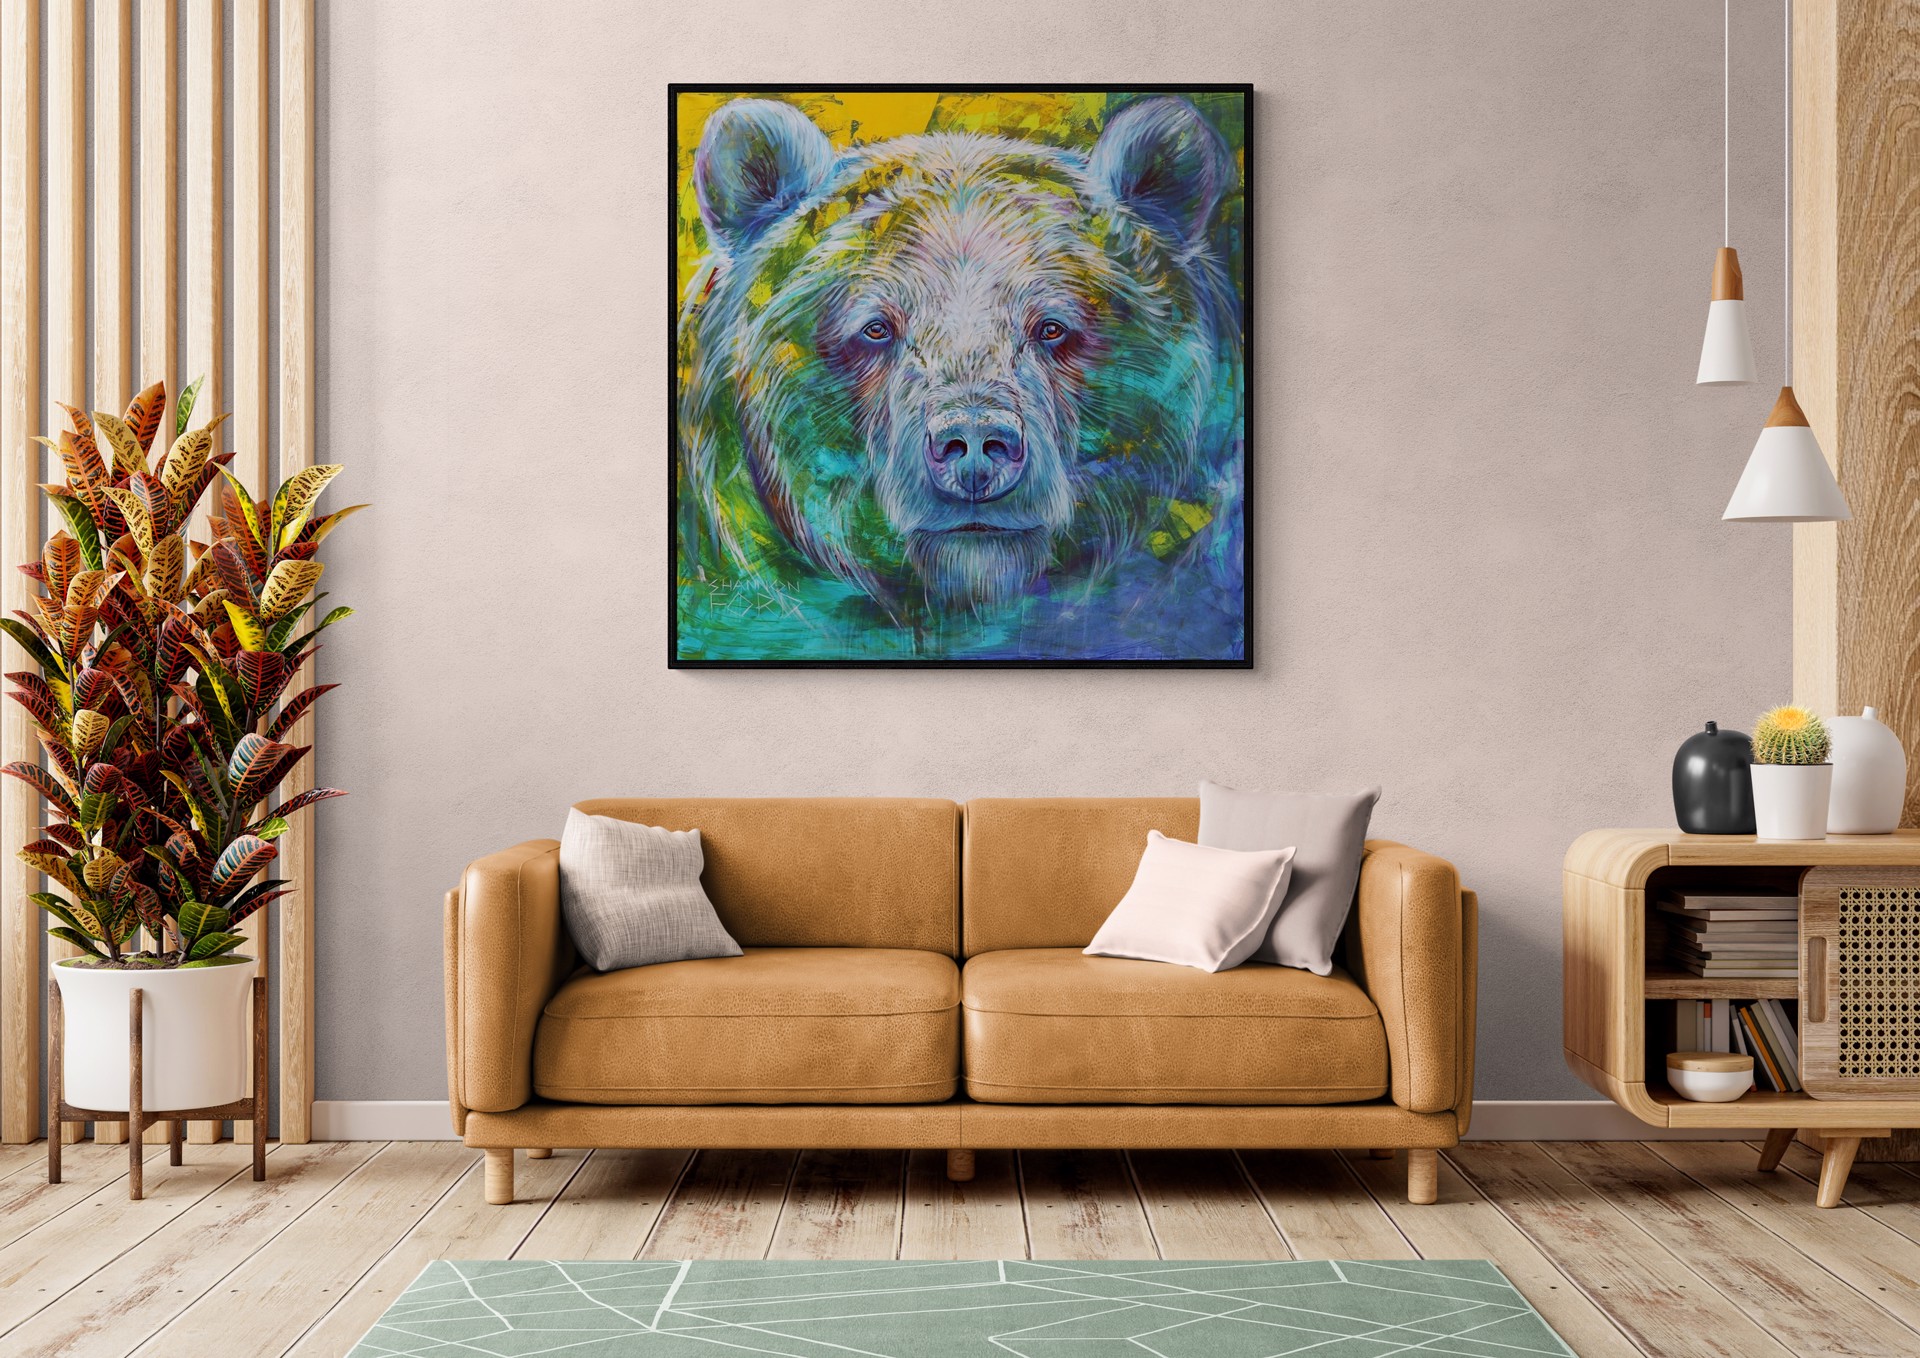 Grizzly Bear Blessings by Shannon Ford